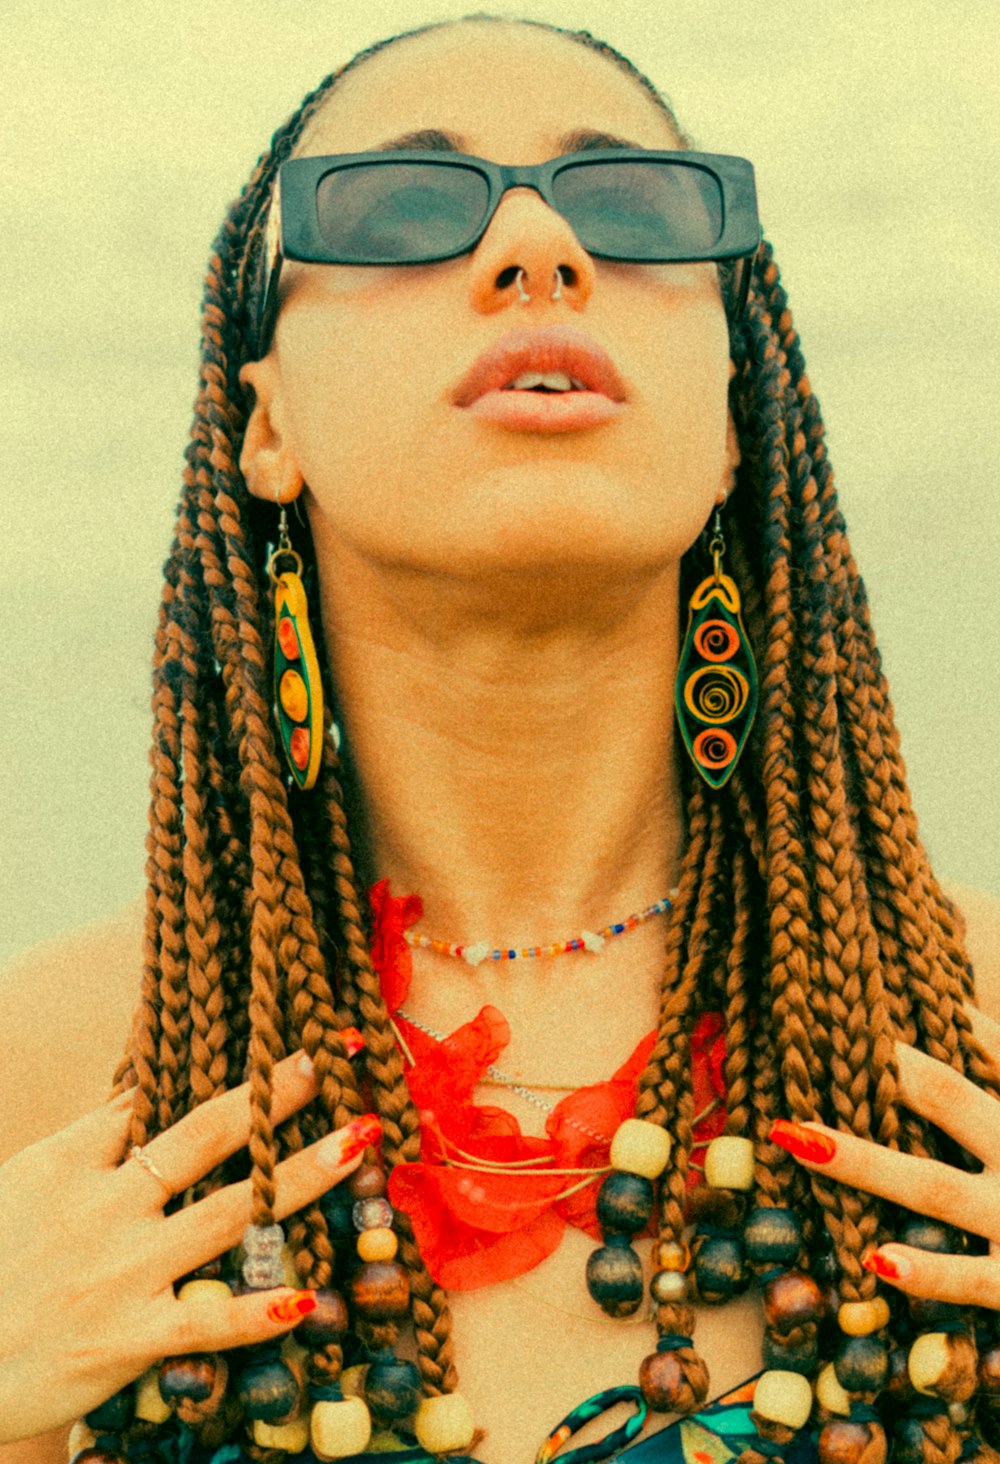 a woman wearing sunglasses and a necklace with beads